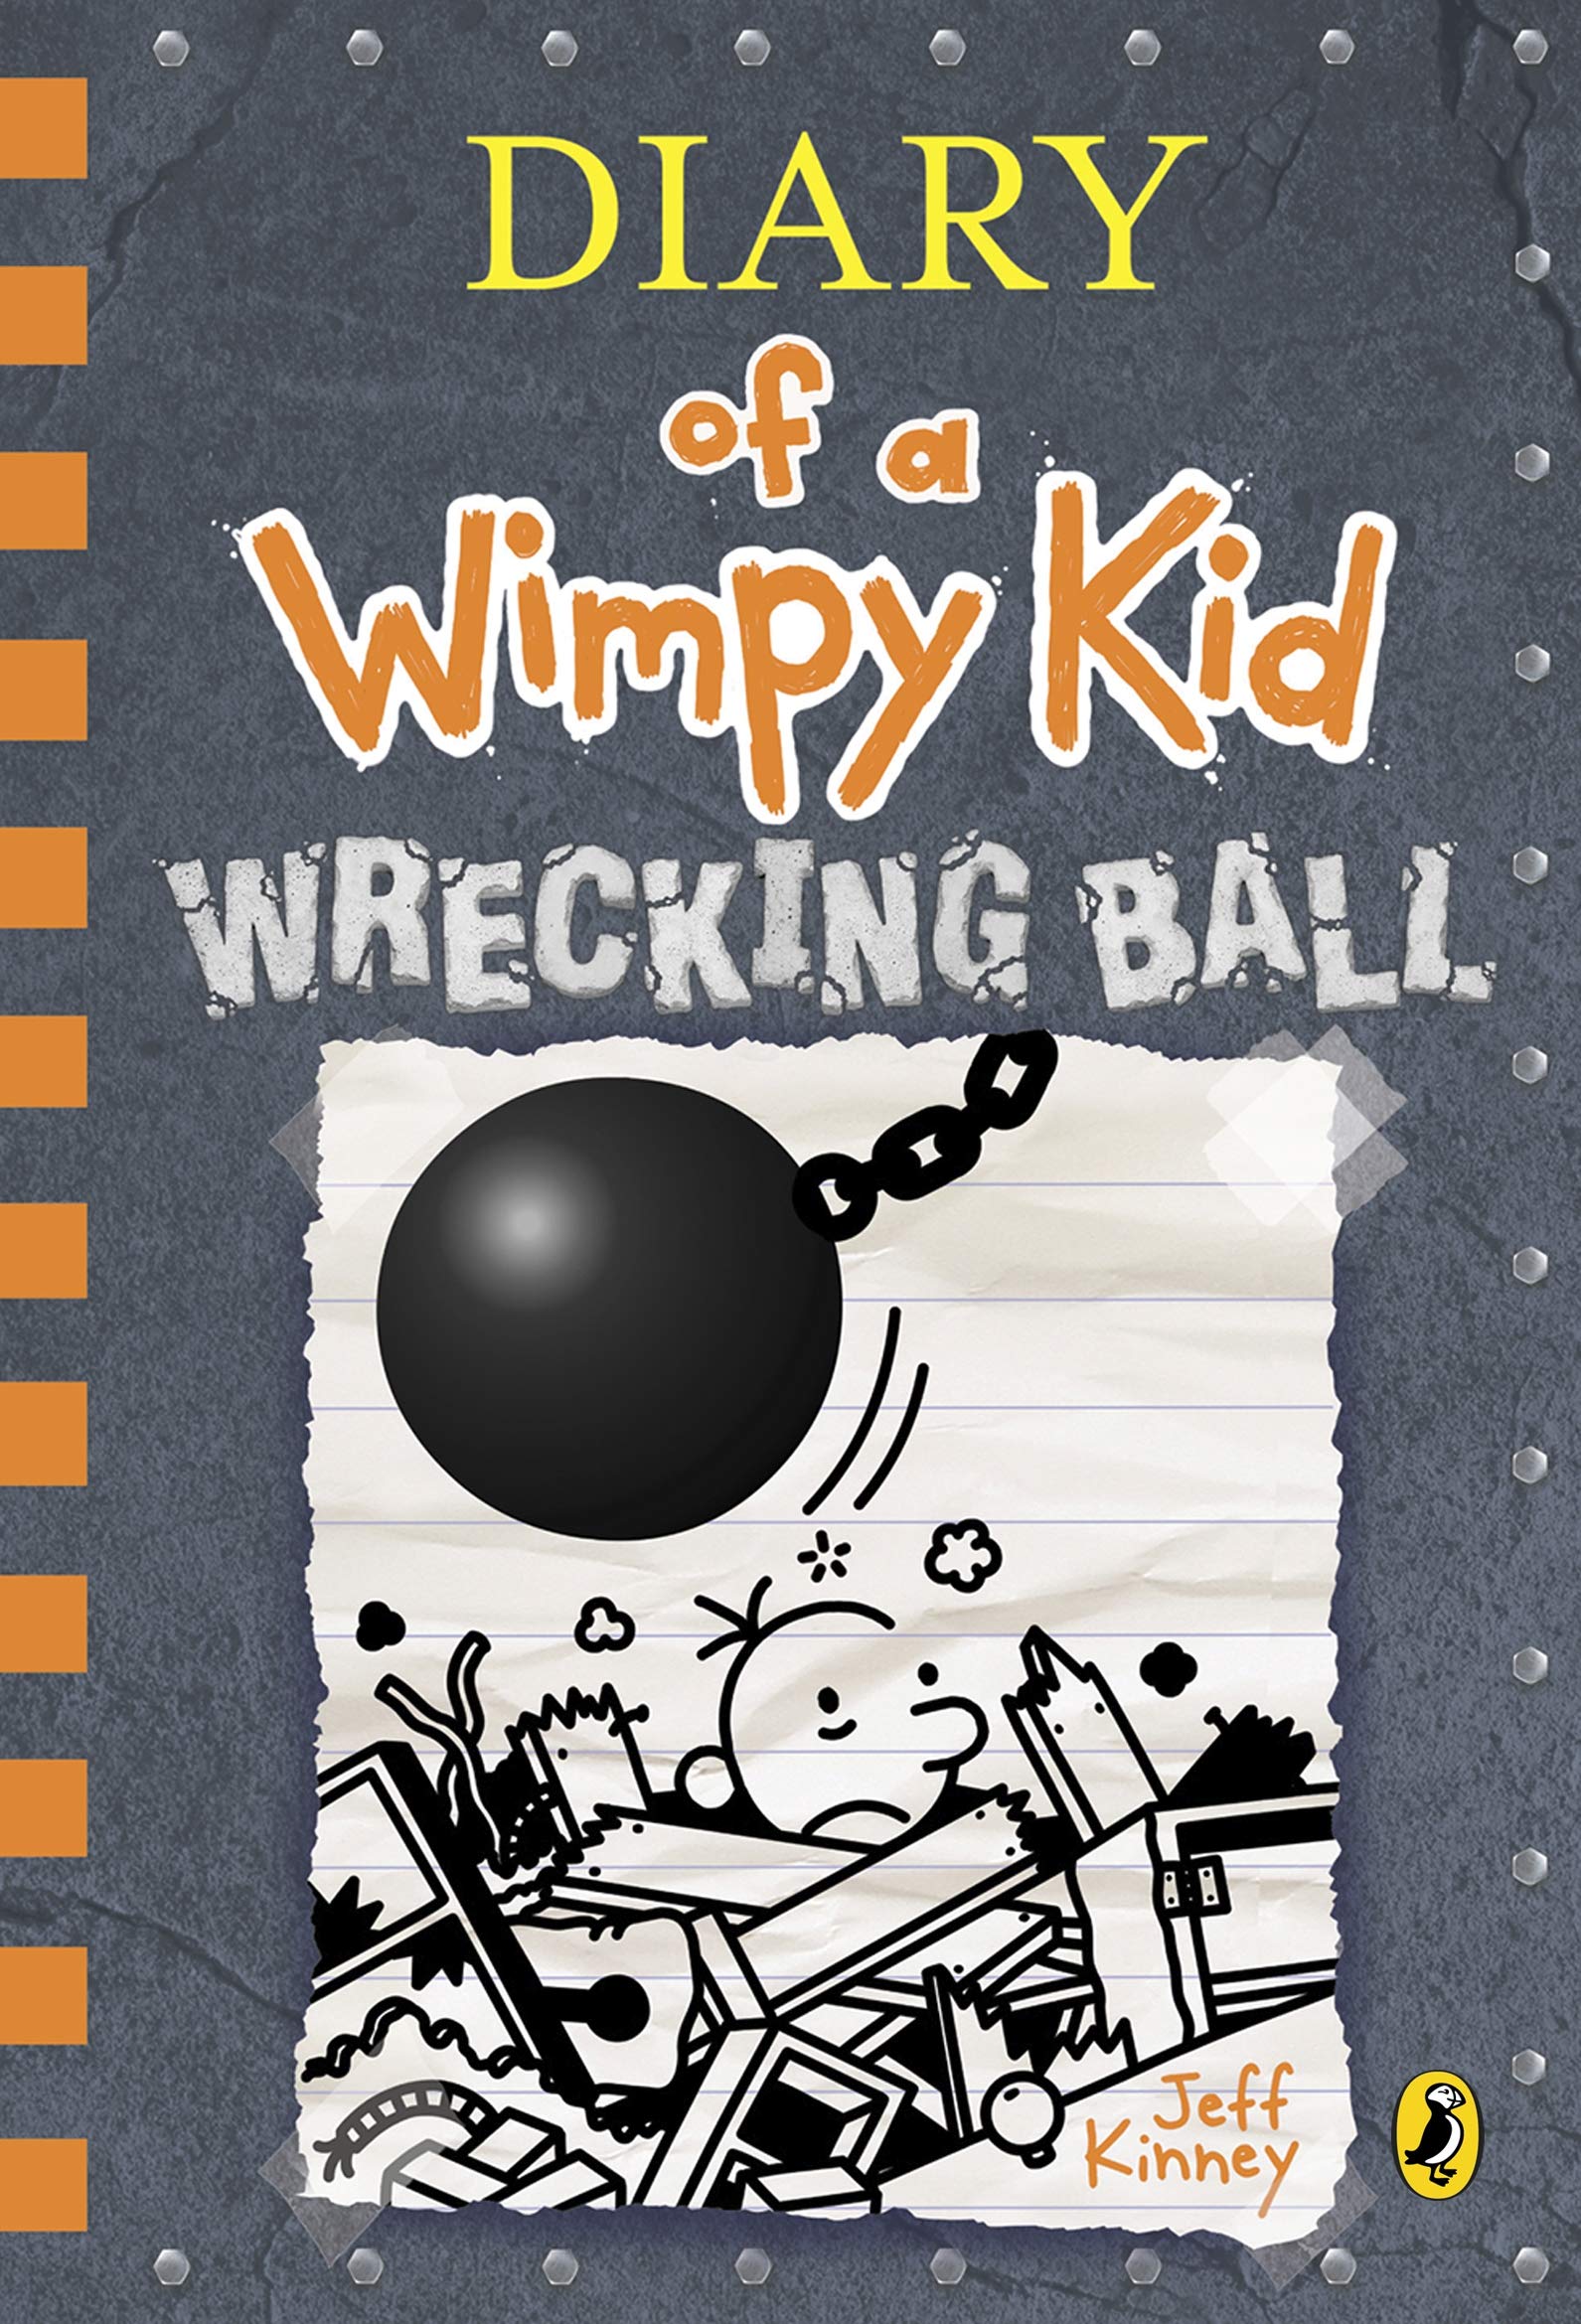 Diary of a Wimpy Kid #14 : Wrecking Ball (Hardcover, 영국판)